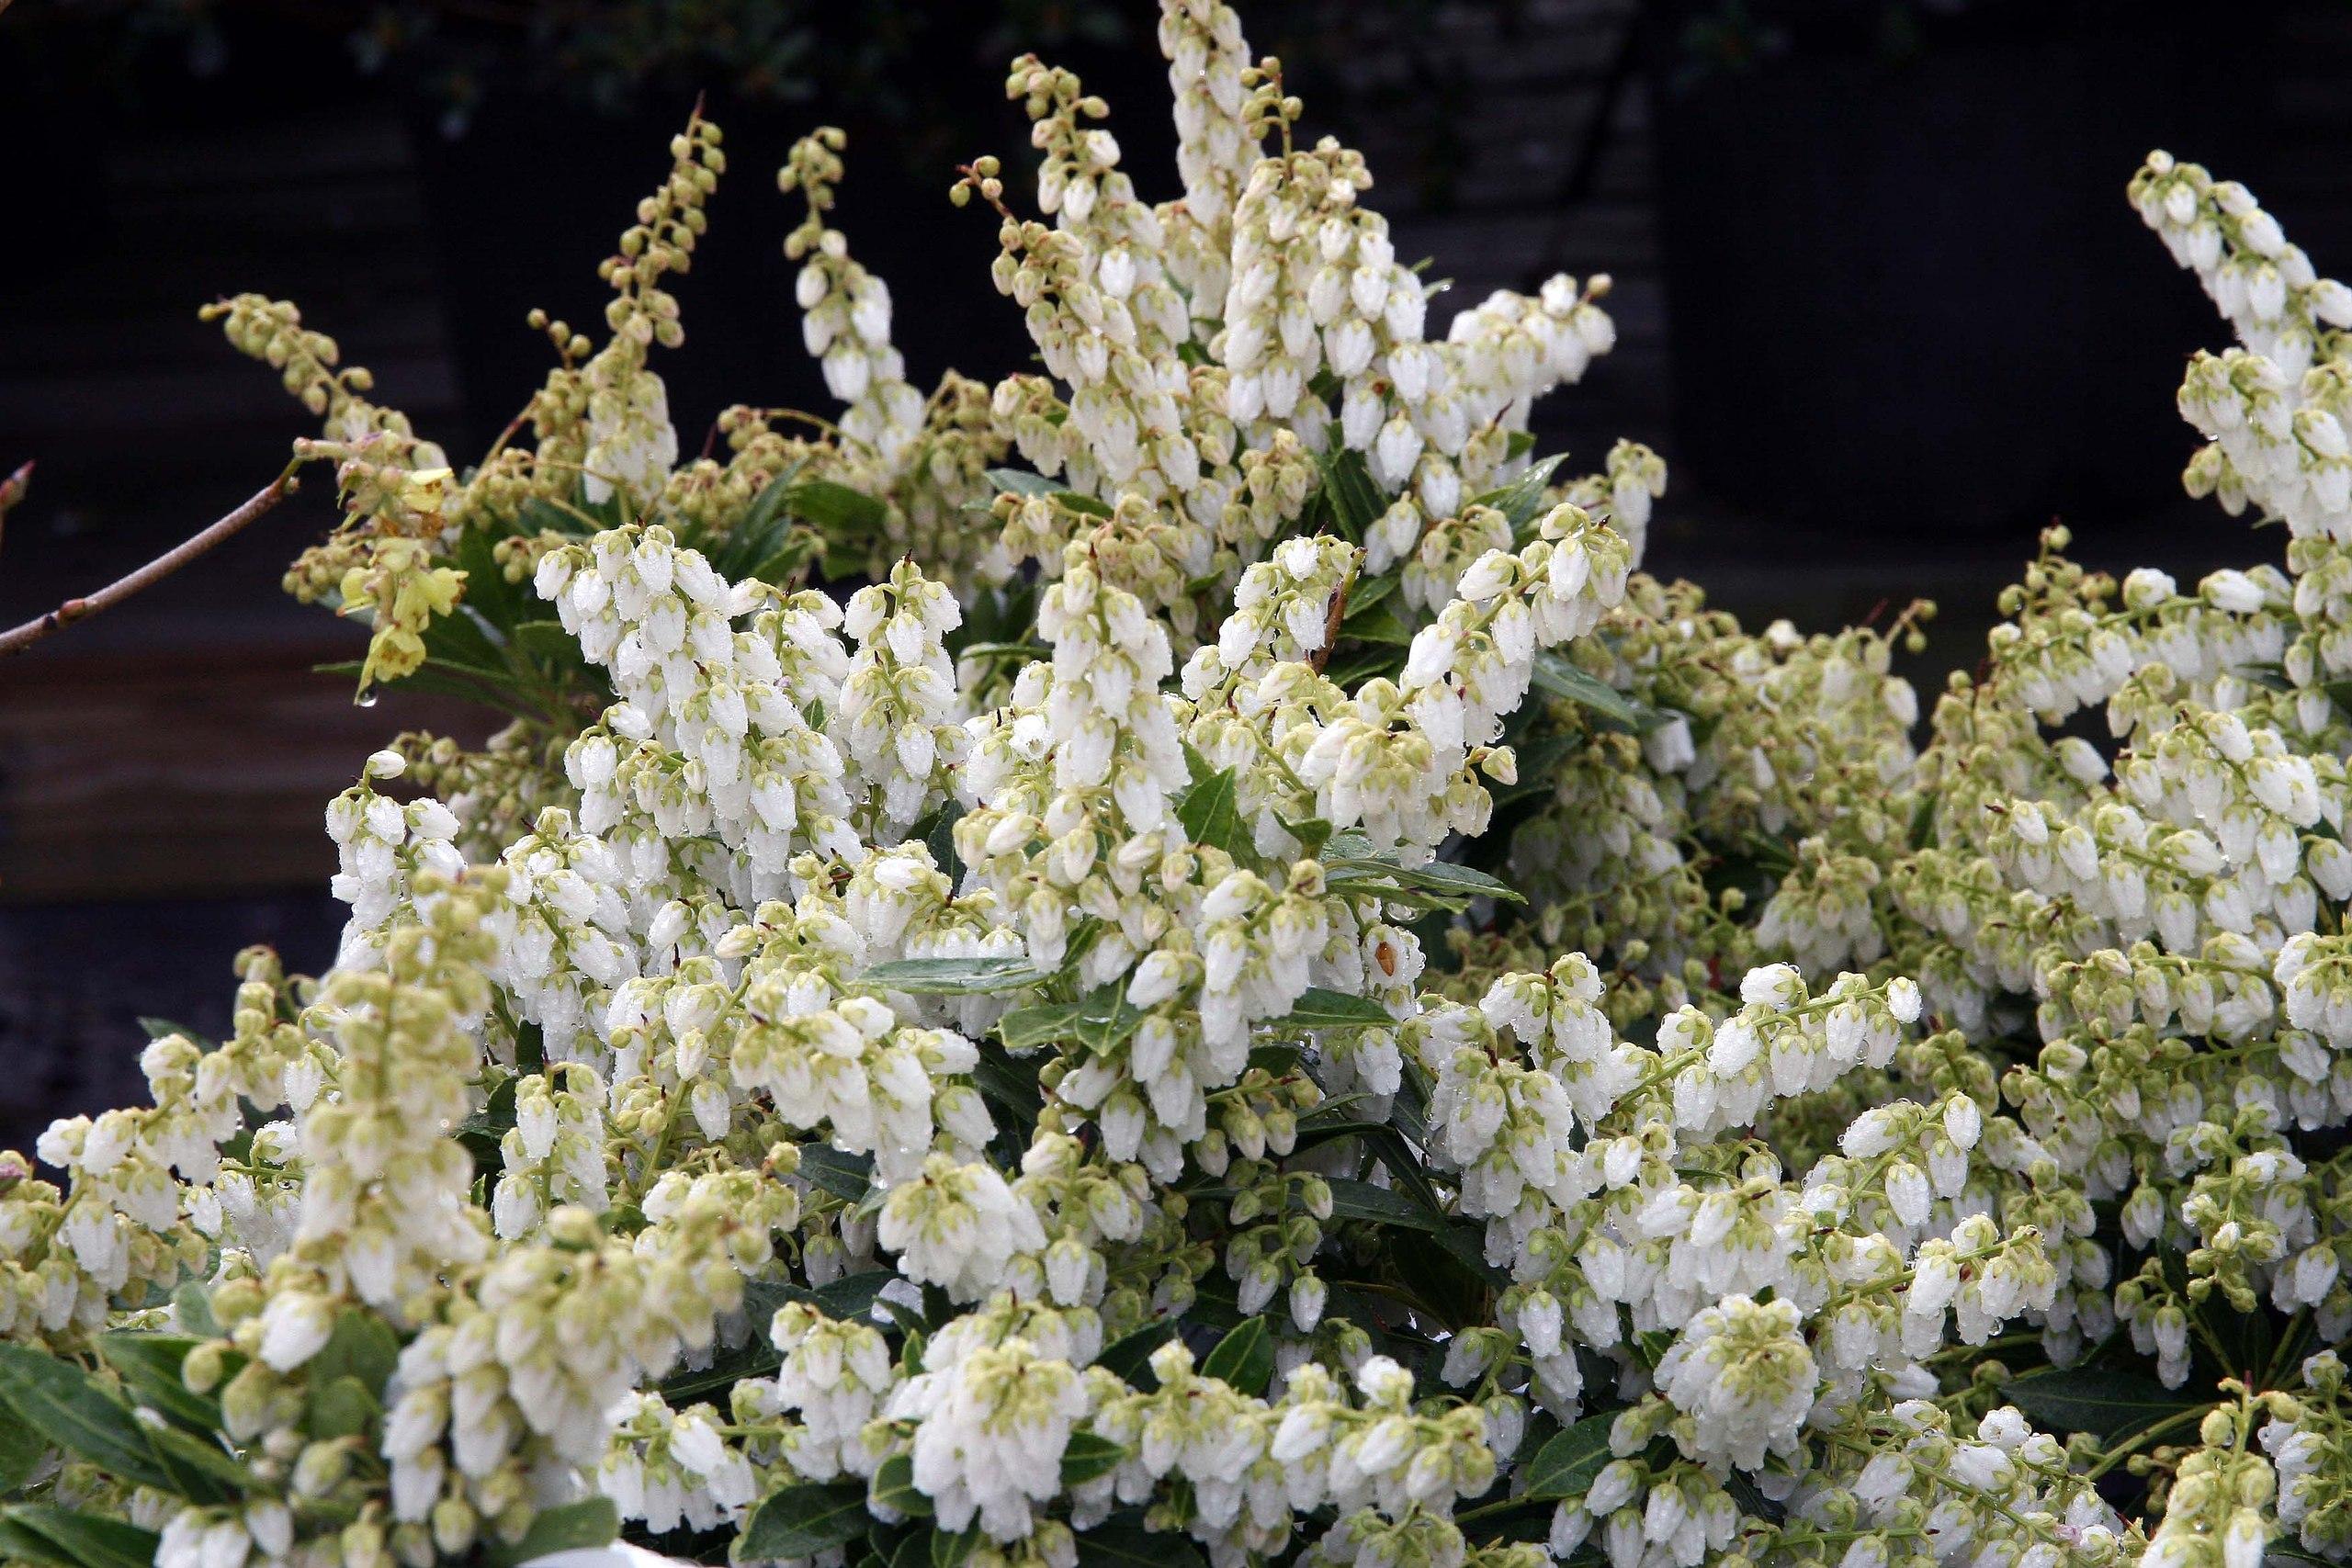 white flowers with beige-yellow sepals, stems and green leaves